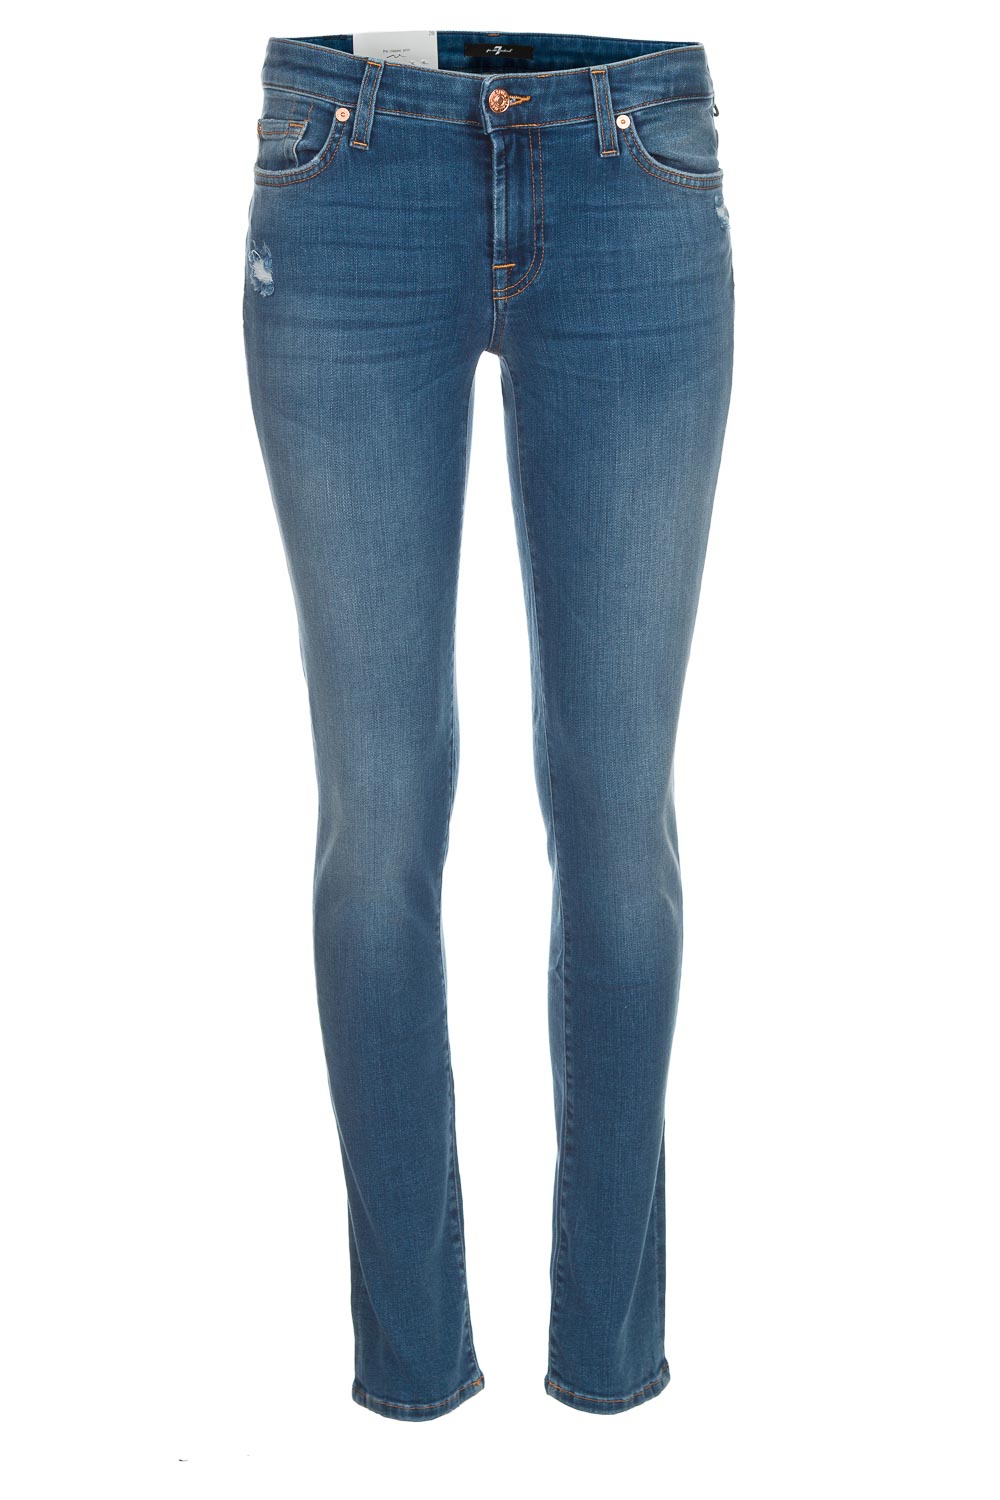 7 for all mankind the skinny slim illusion